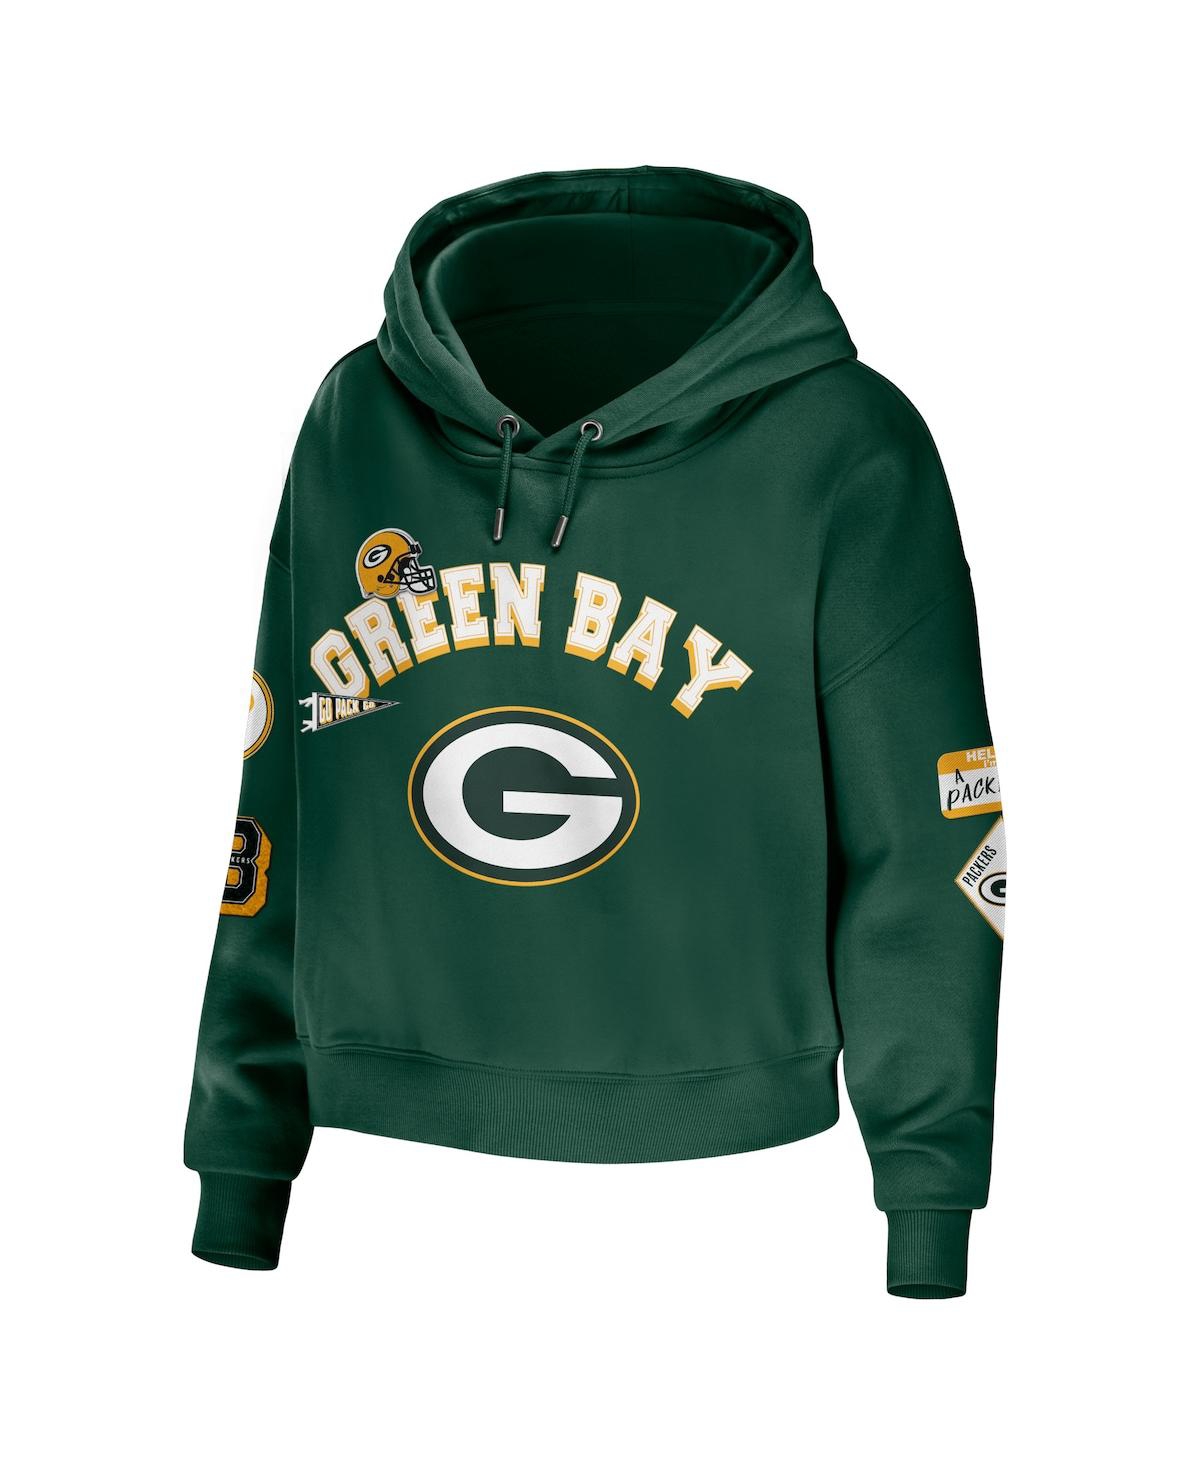 Shop Wear By Erin Andrews Women's  Green Green Bay Packers Modest Cropped Pullover Hoodie